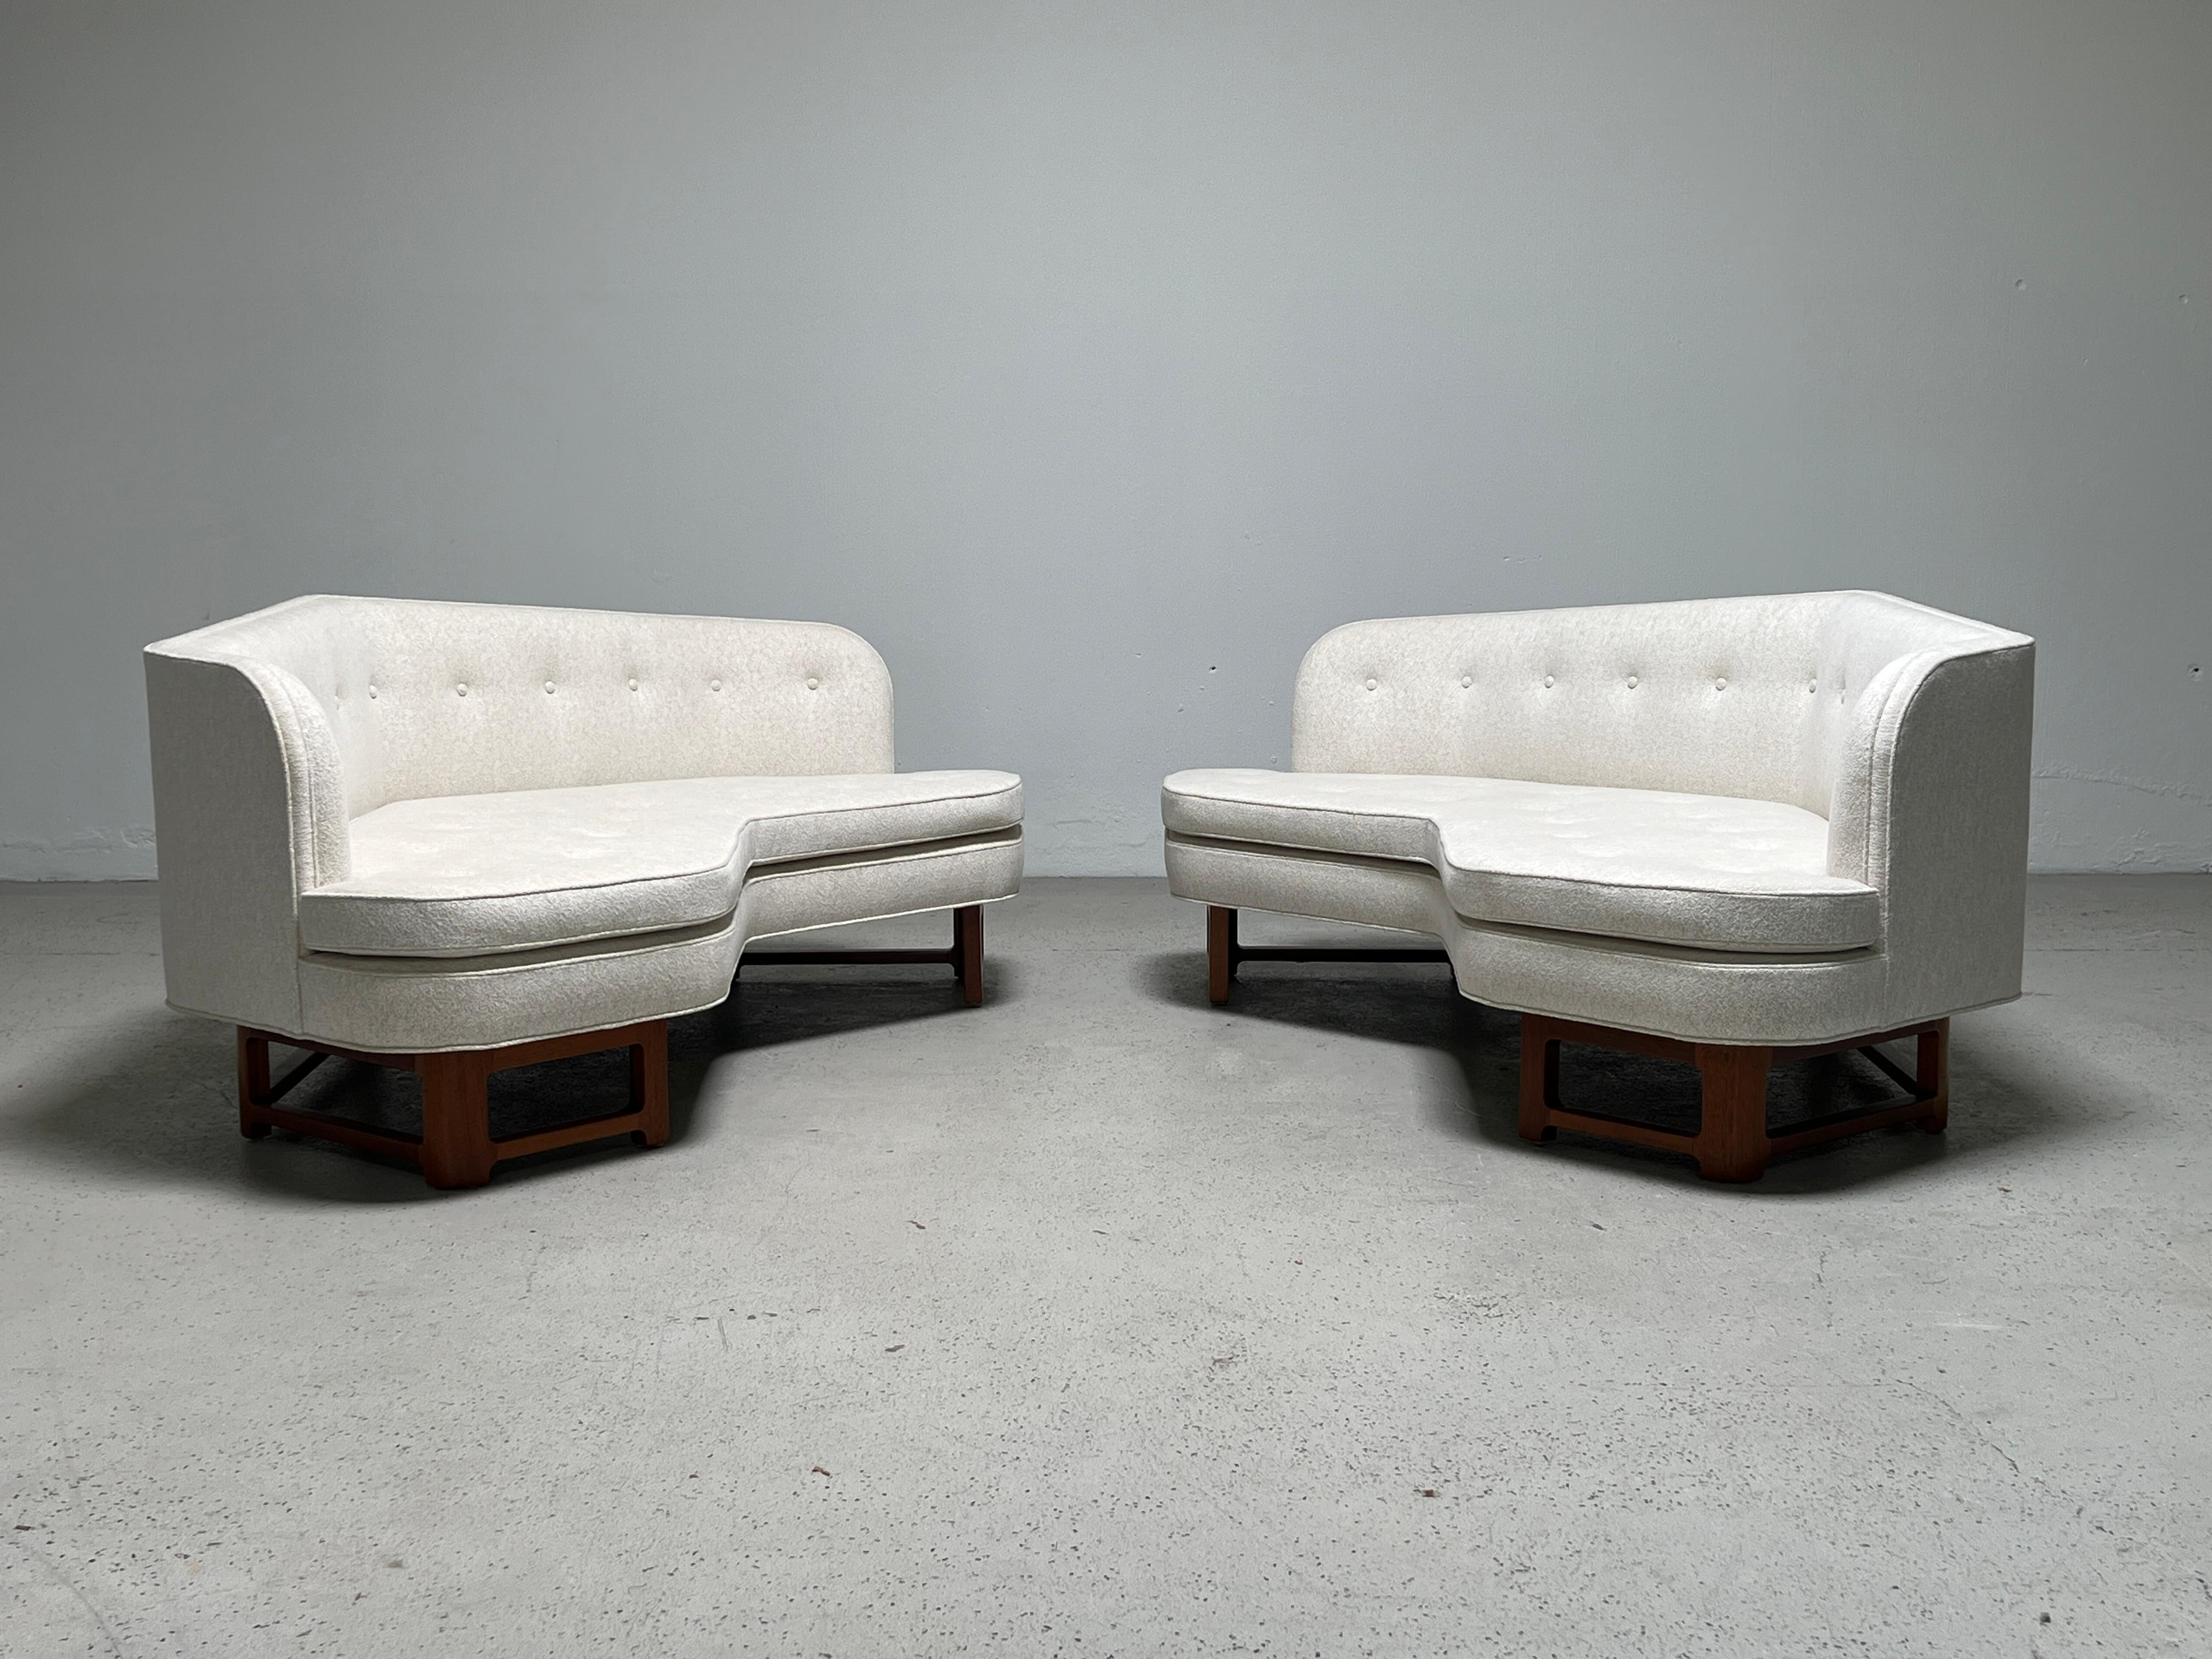 Mid-20th Century Pair of Angled Sofas by Edward Wormley for Dunbar